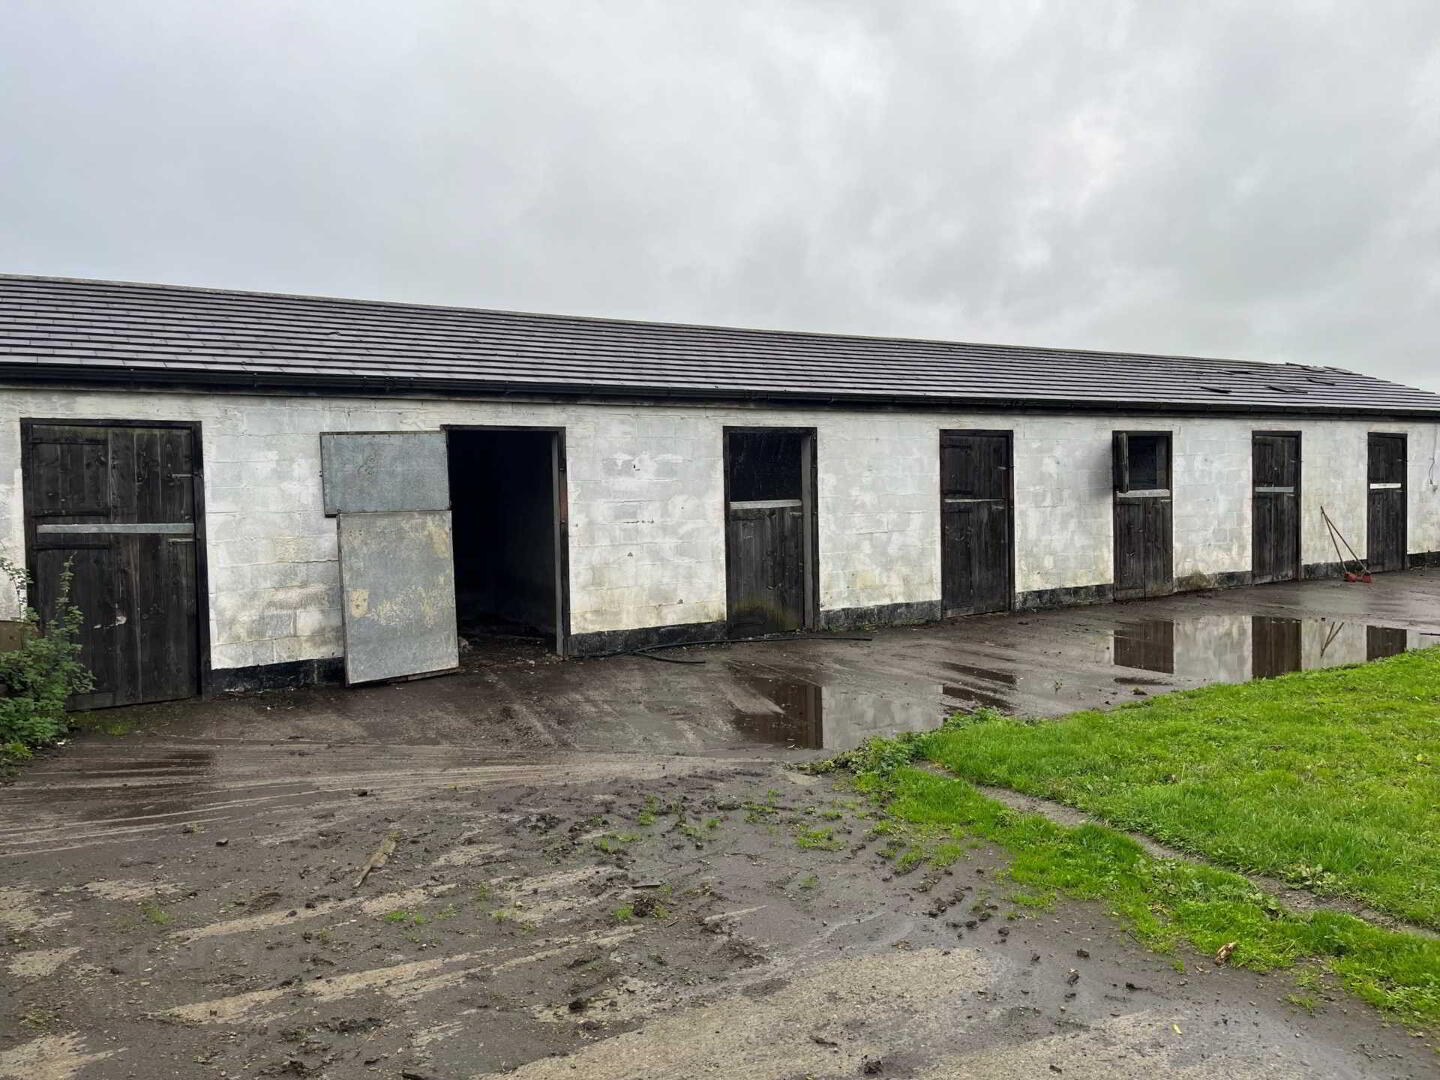 23 ACRES WITH 16 STABLES, Rathfeigh